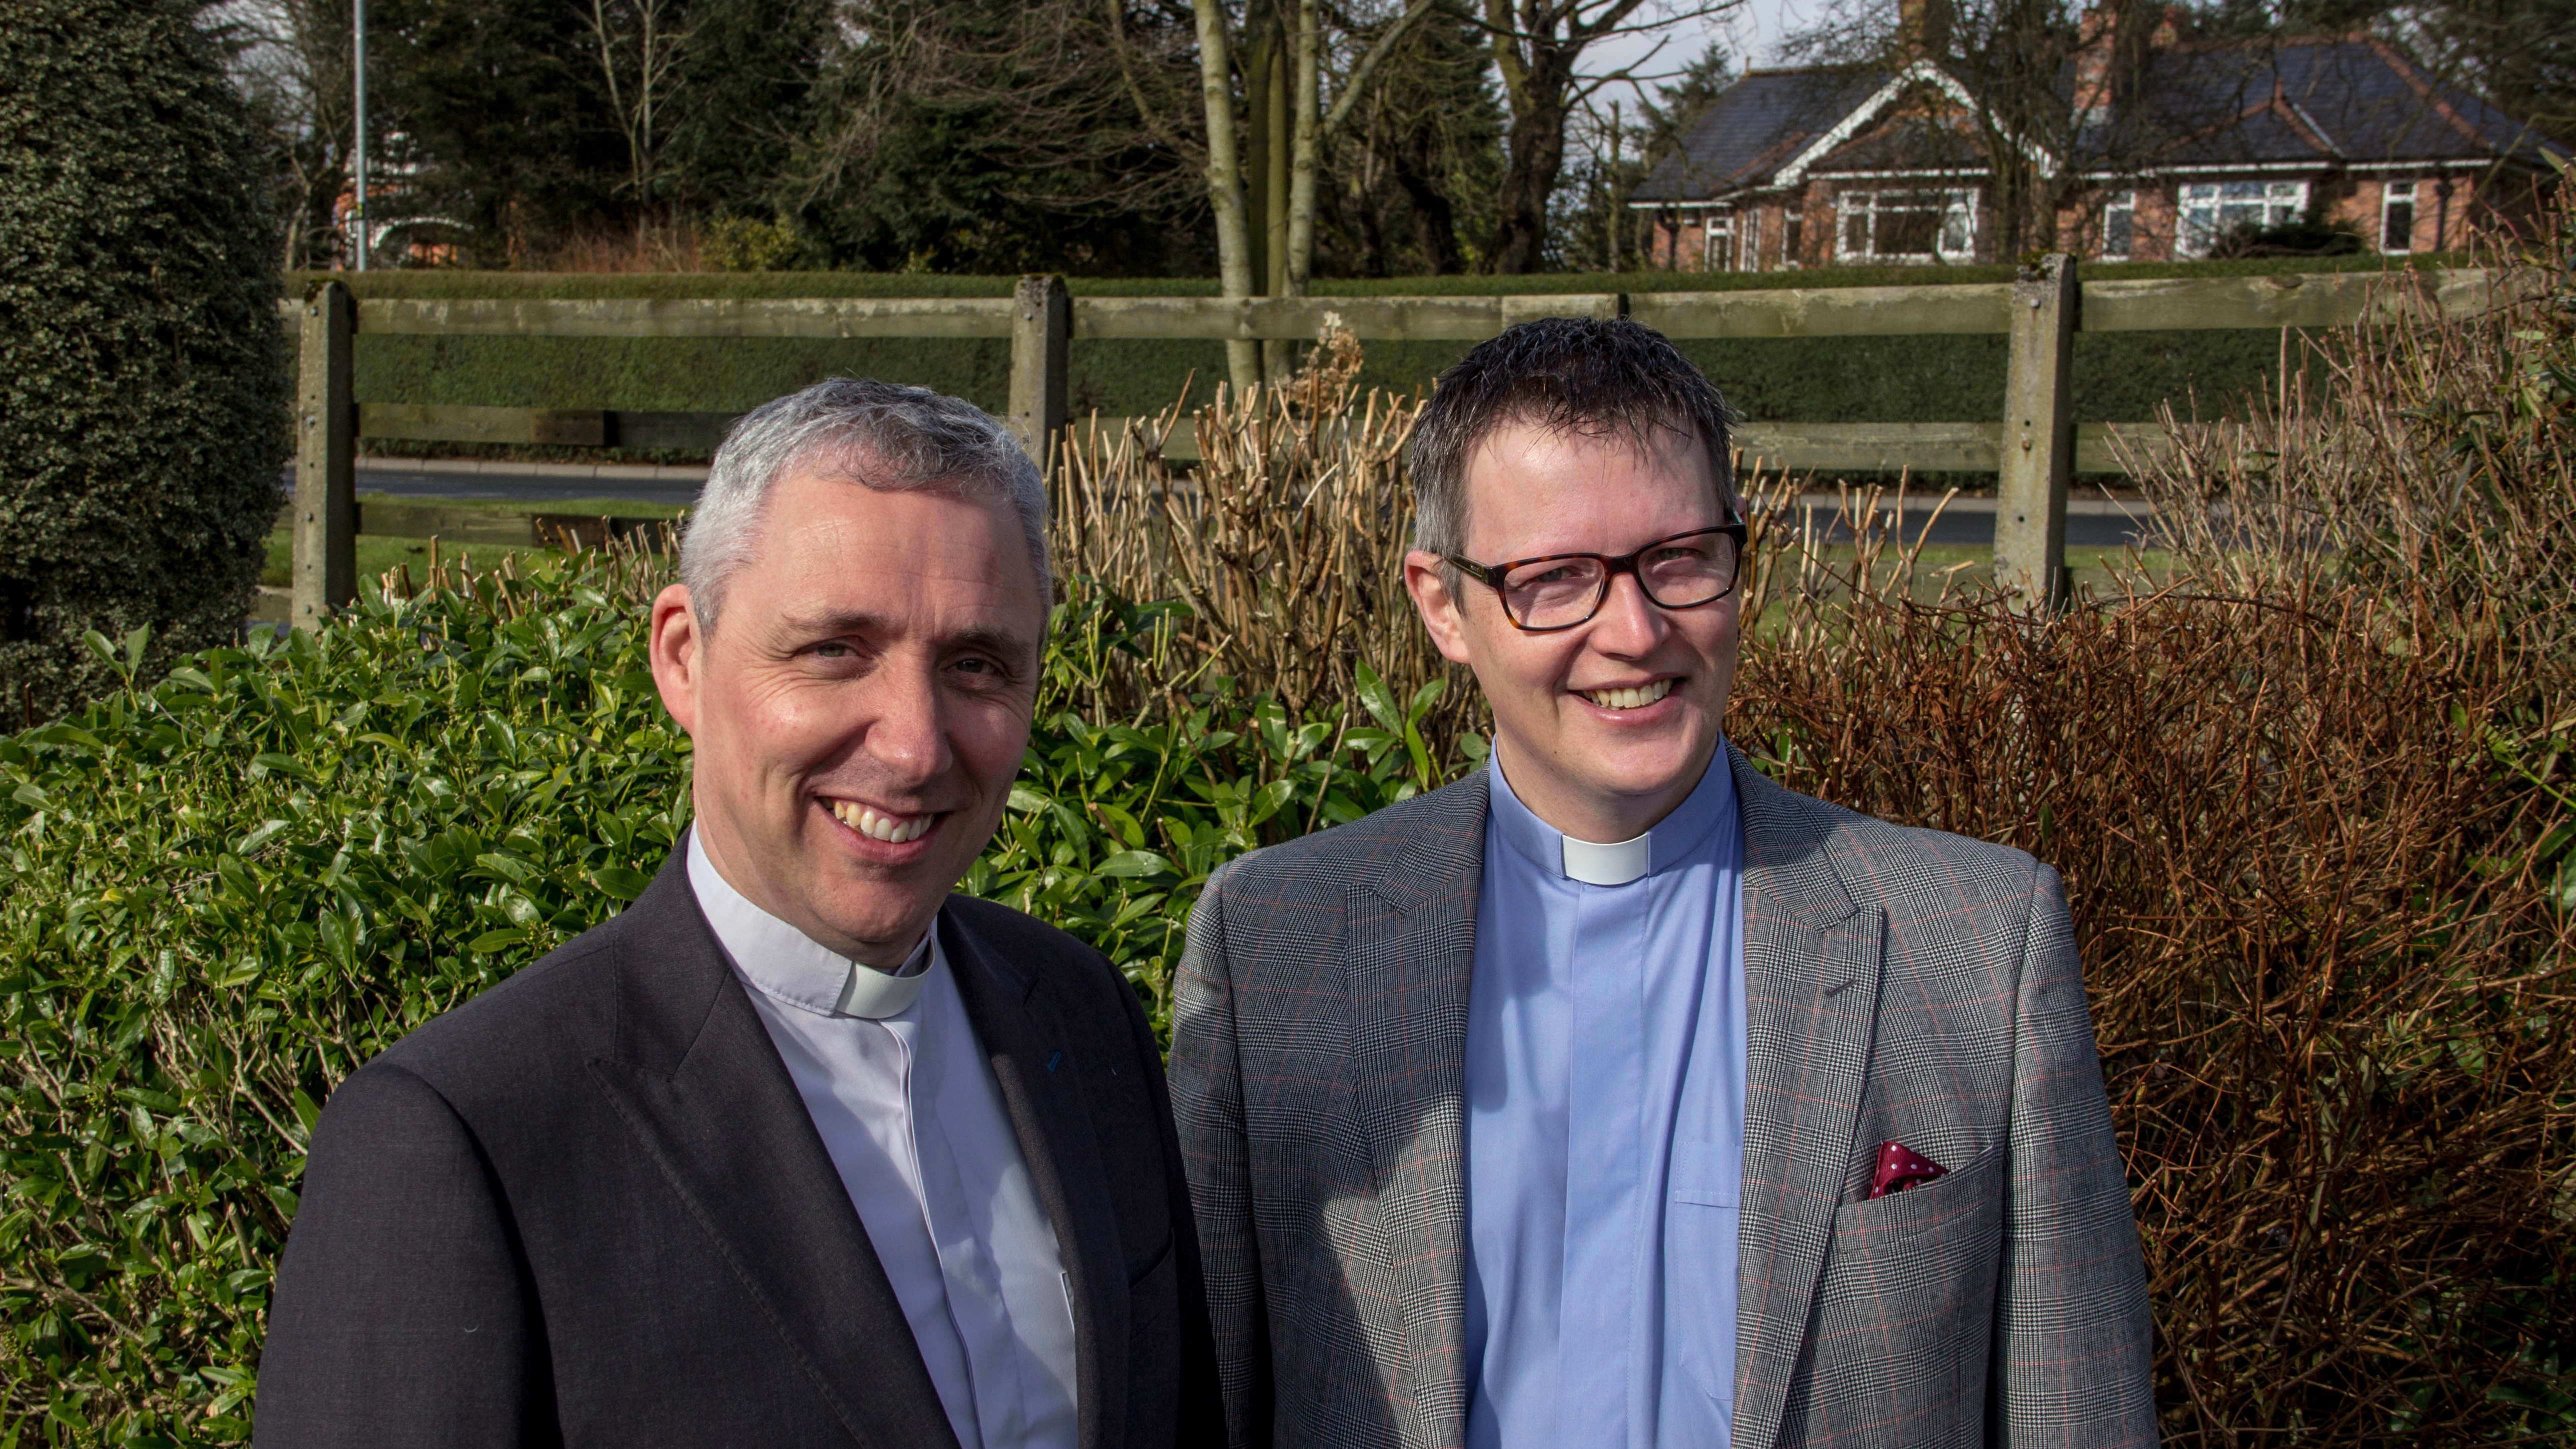 Paul Farren, who's Catholic, and Robert Miller, who's Protestant, hope their new book can get people talking about forgiveness. They say it's the only way to live in true peace. 